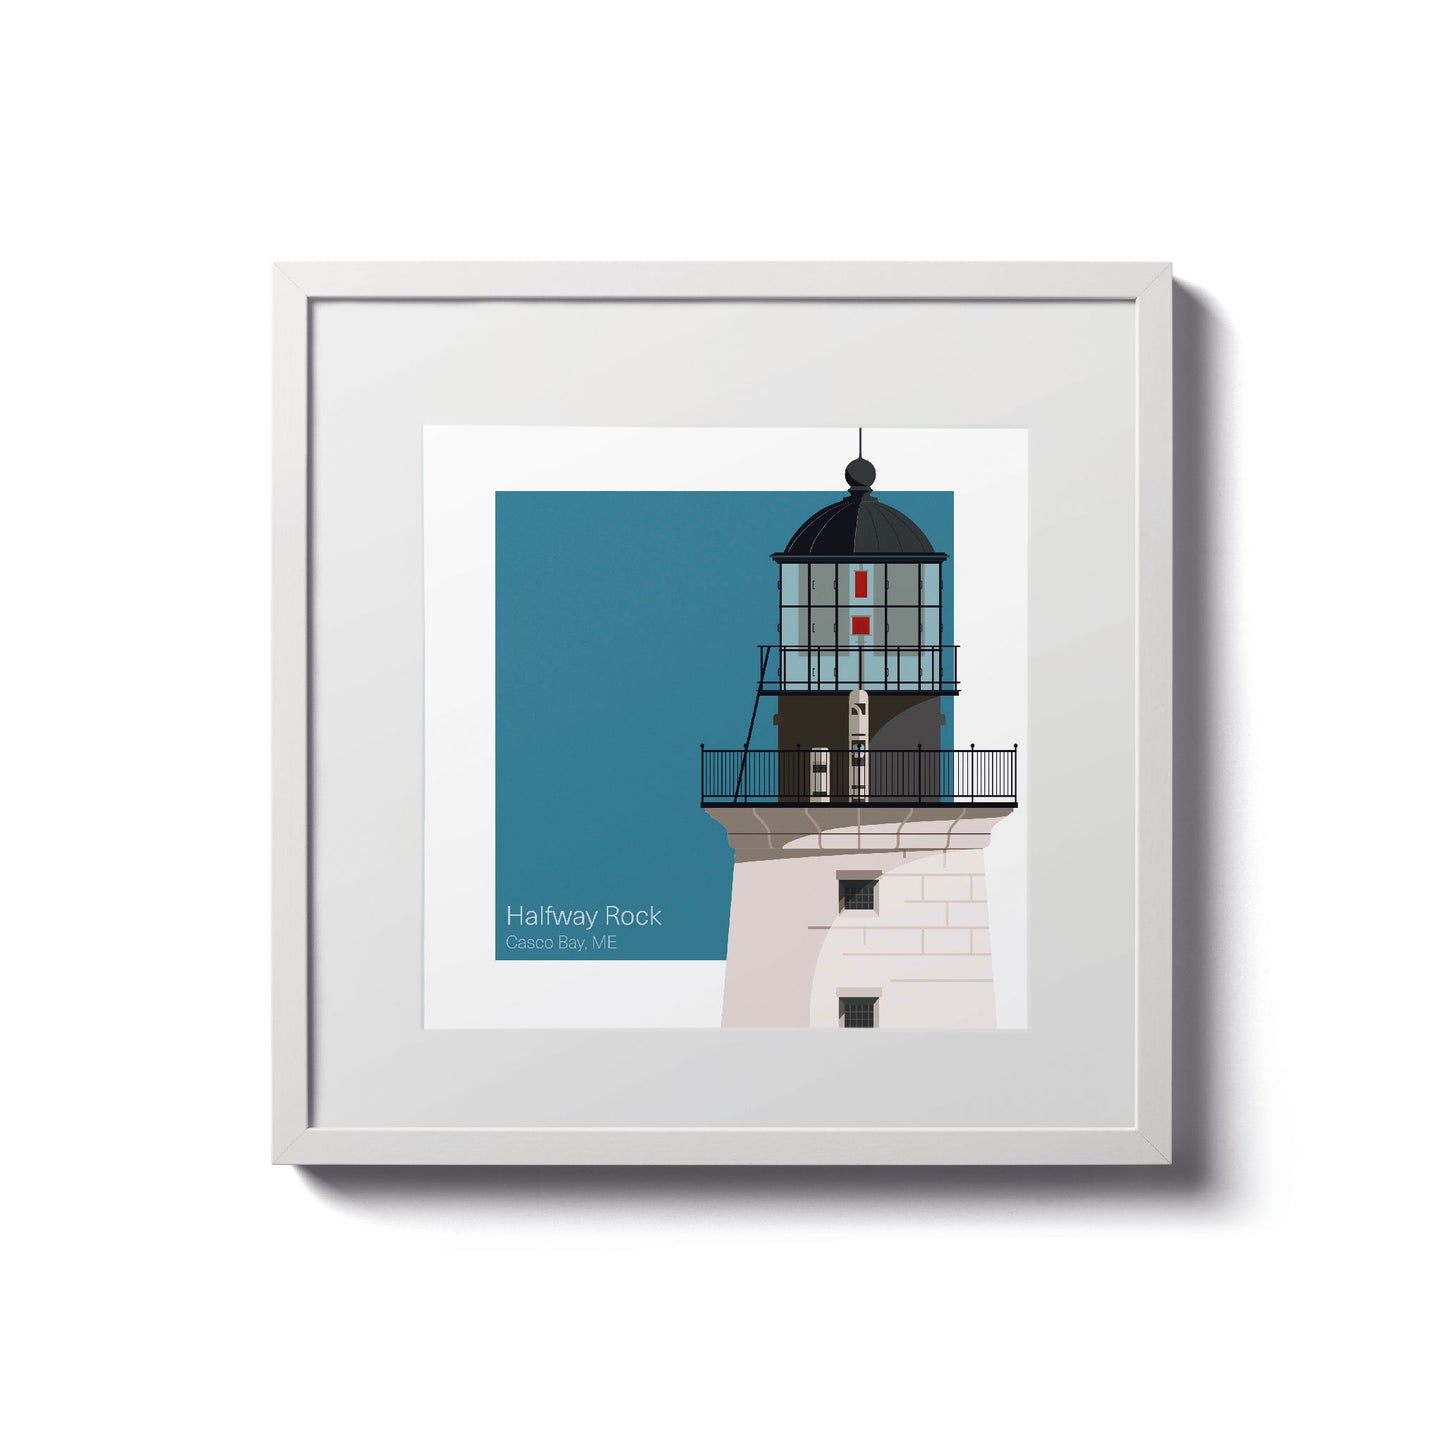 Illustration of the Halfway Rock lighthouse, ME, USA. On a white background with aqua blue square as a backdrop., in a white frame  and measuring 8"x8" (20x20cm).